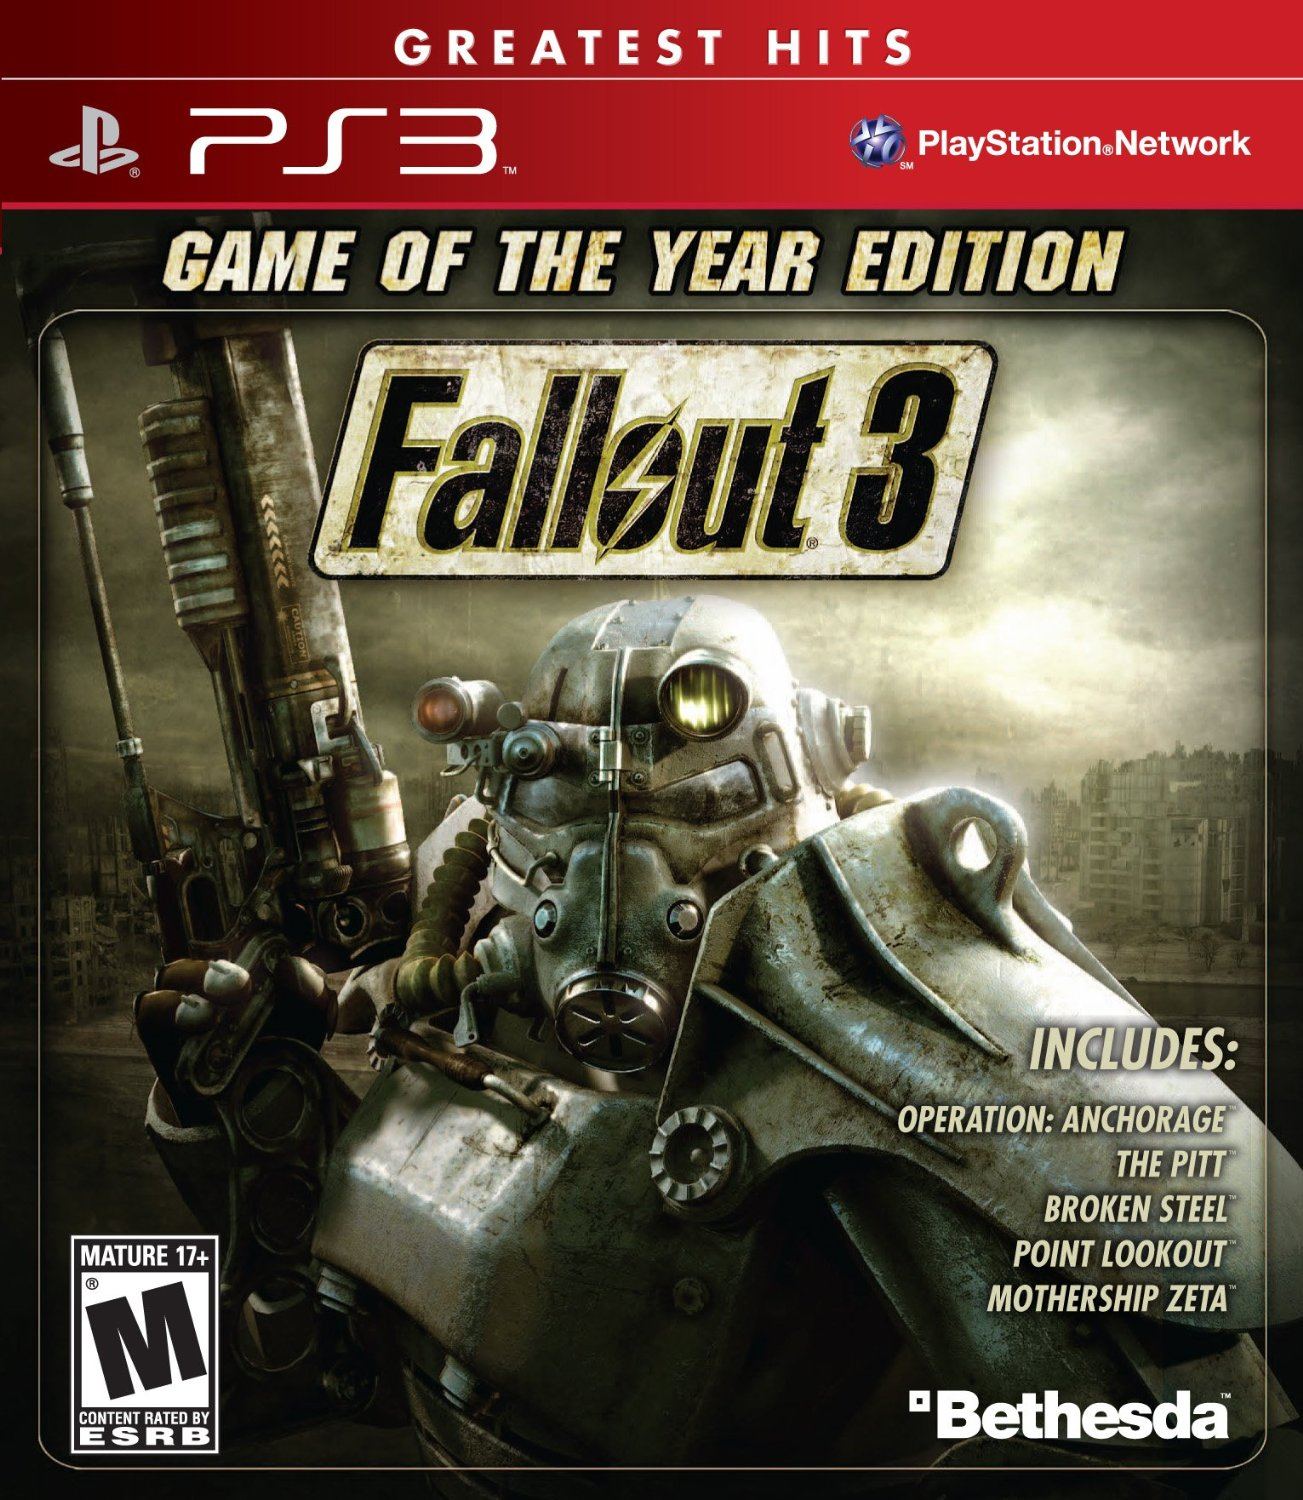 Fallout 3 (Game of the Year Edition) (Greatest Hits) for PlayStation 3